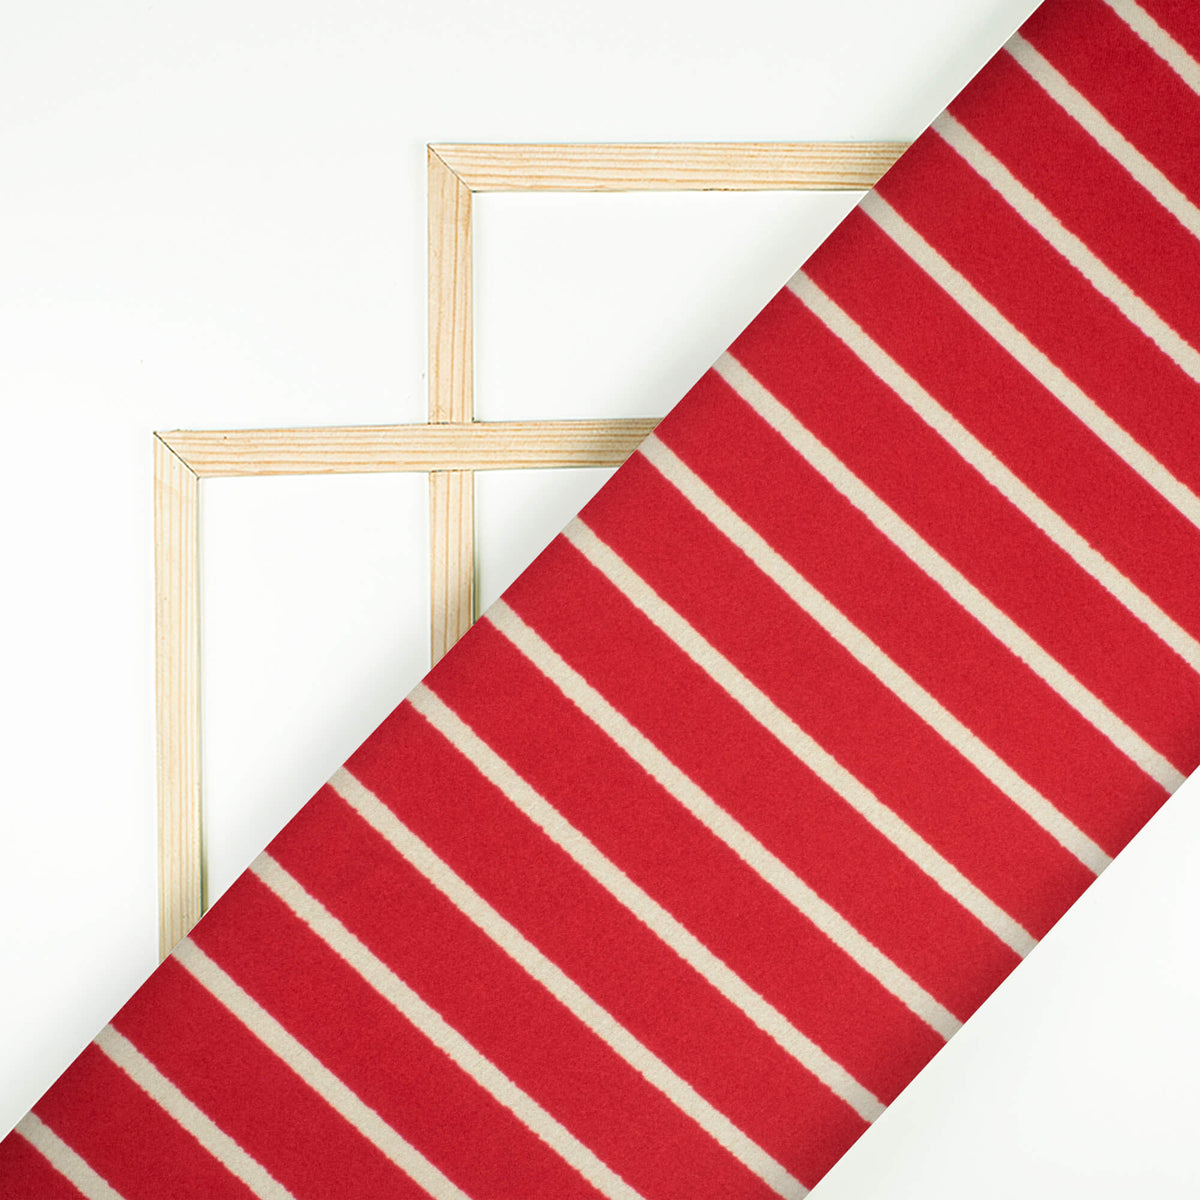  Red And White Striped Fabric